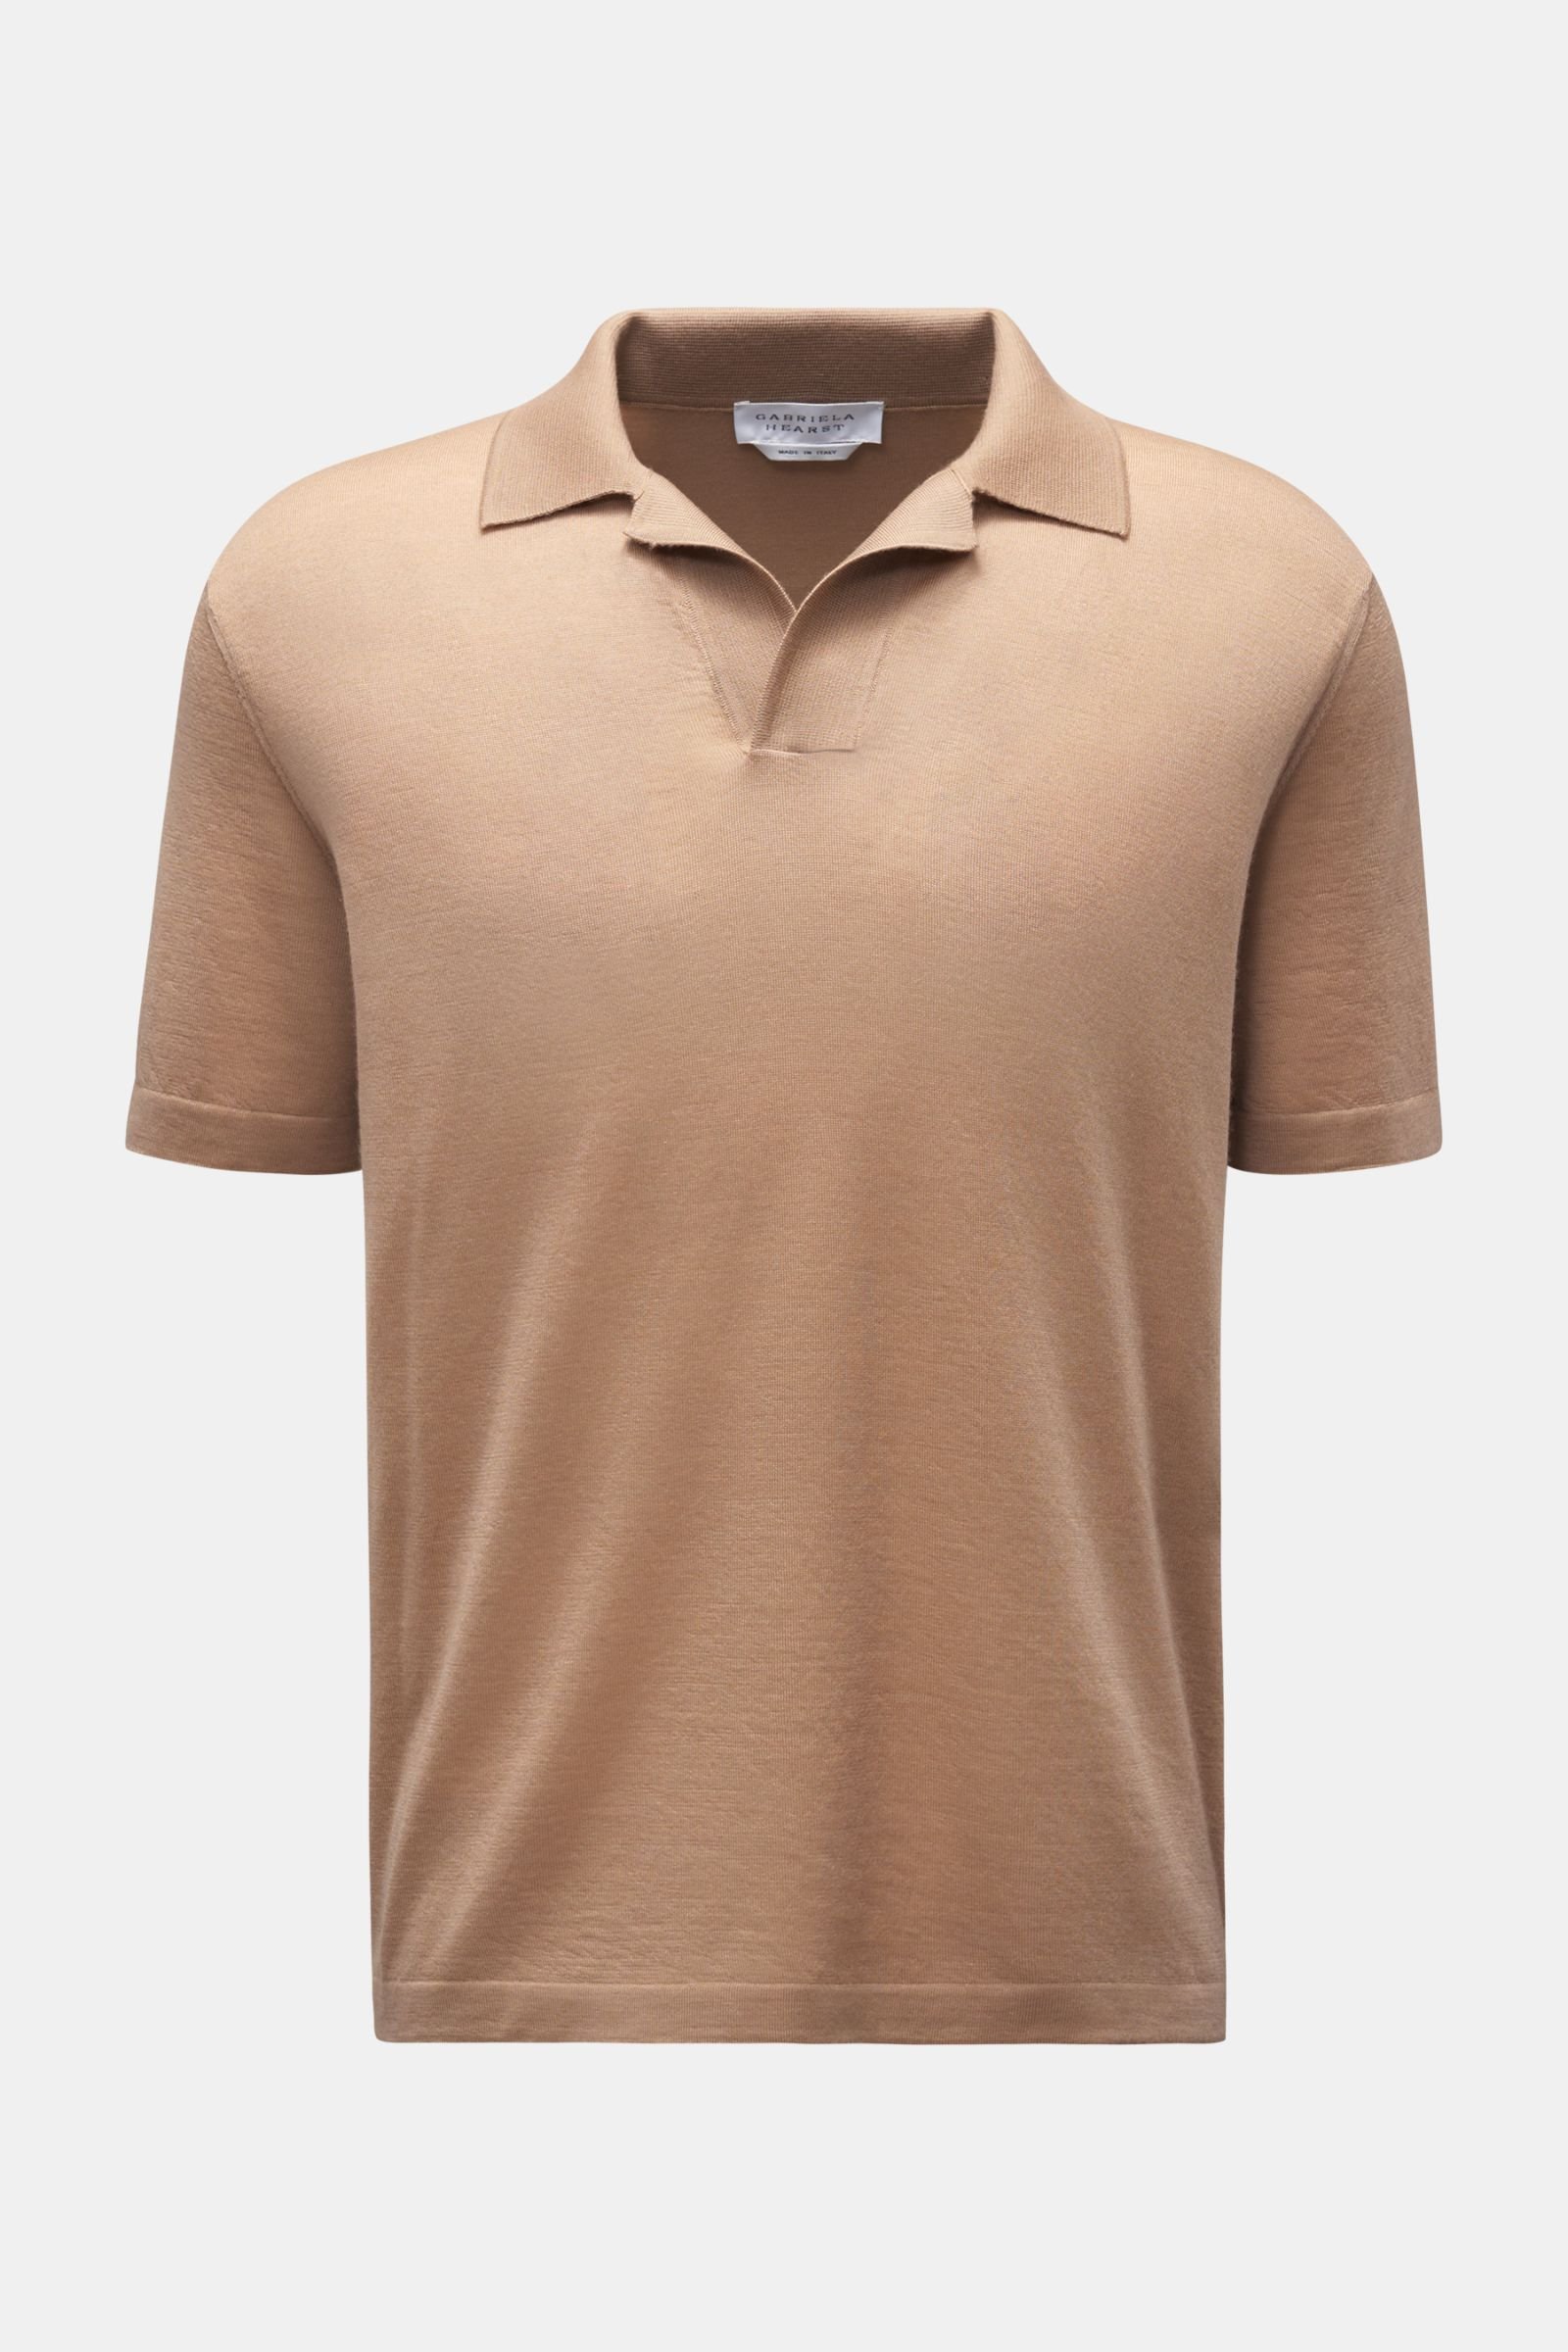 Cashmere short sleeve knit polo 'Stendhal' light brown